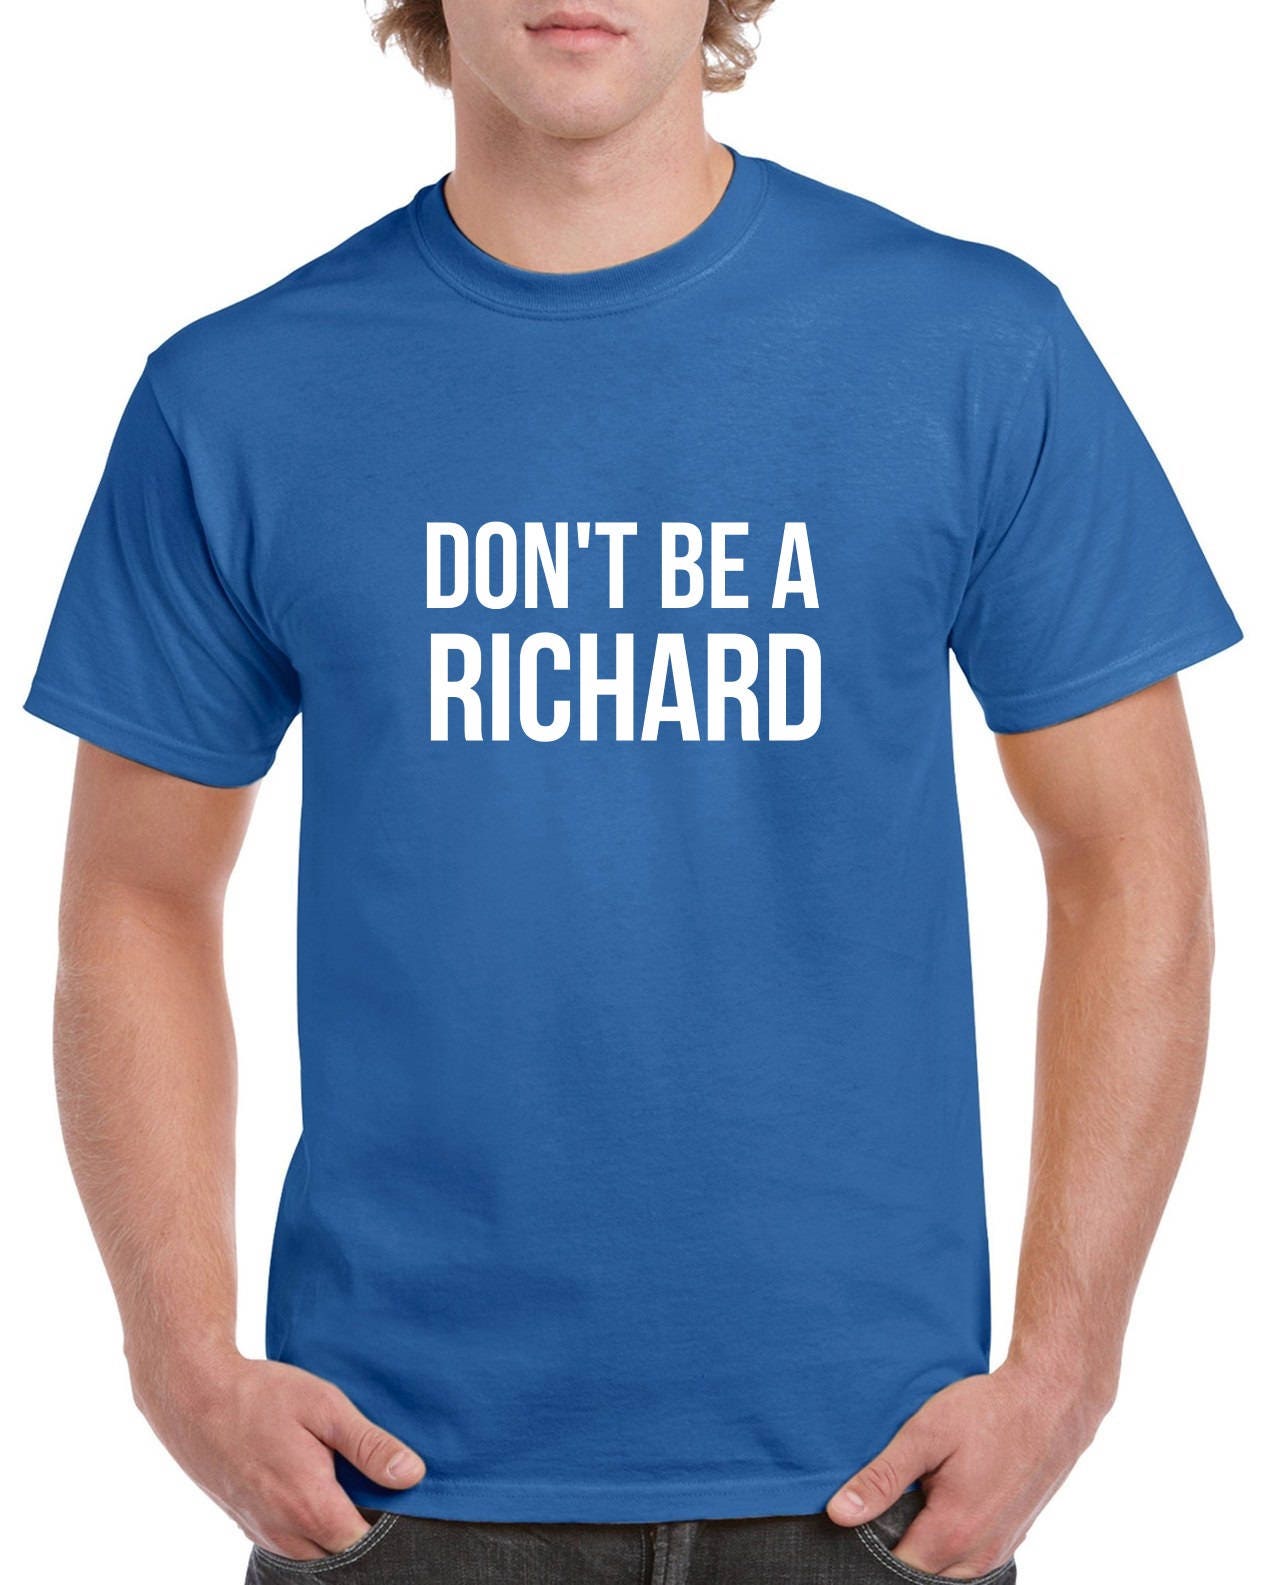 Don't Be A Richard Shirt Tshirt With Funny Saying Funny | Etsy